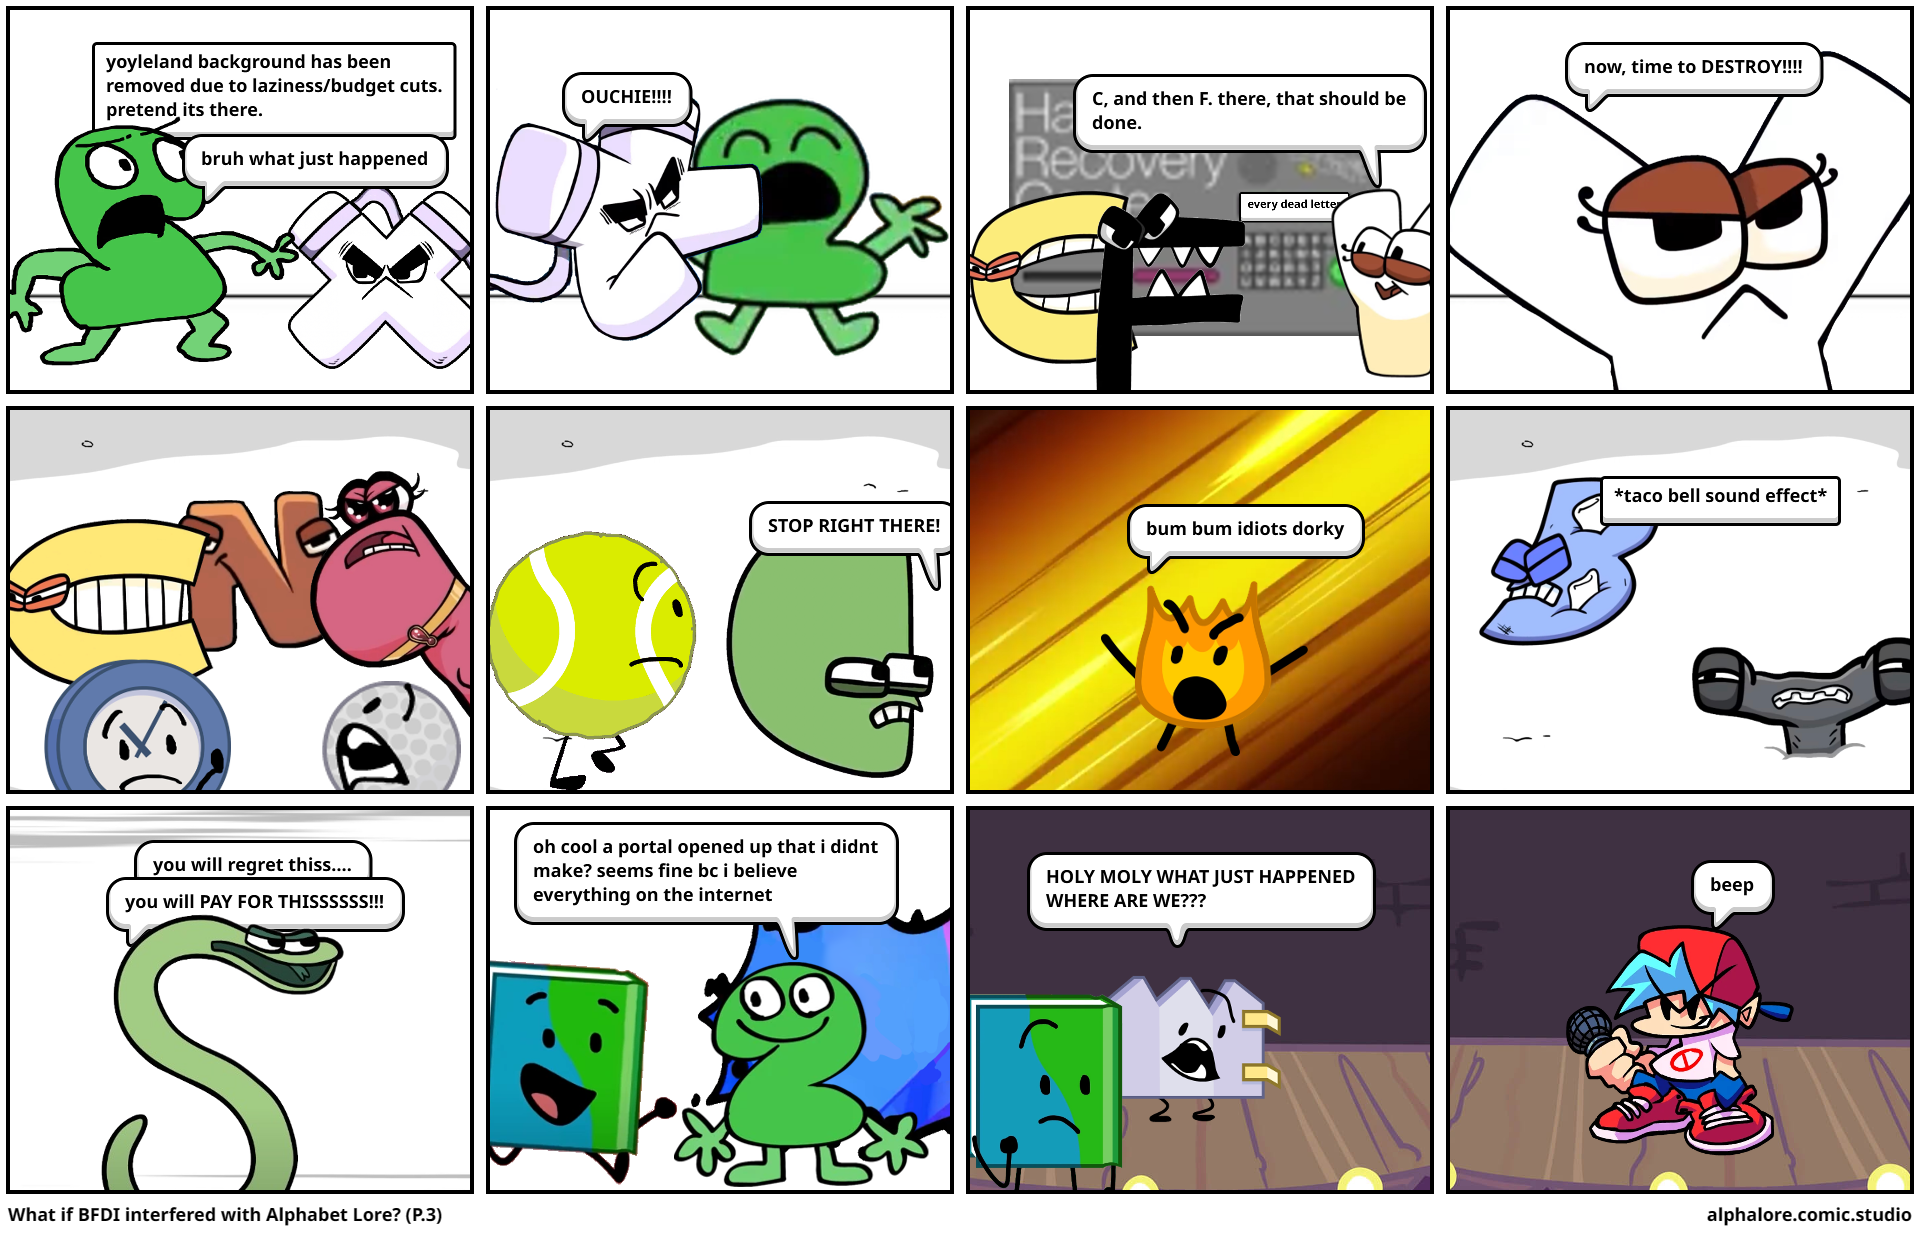 What if BFDI interfered with Alphabet Lore? (P.3)